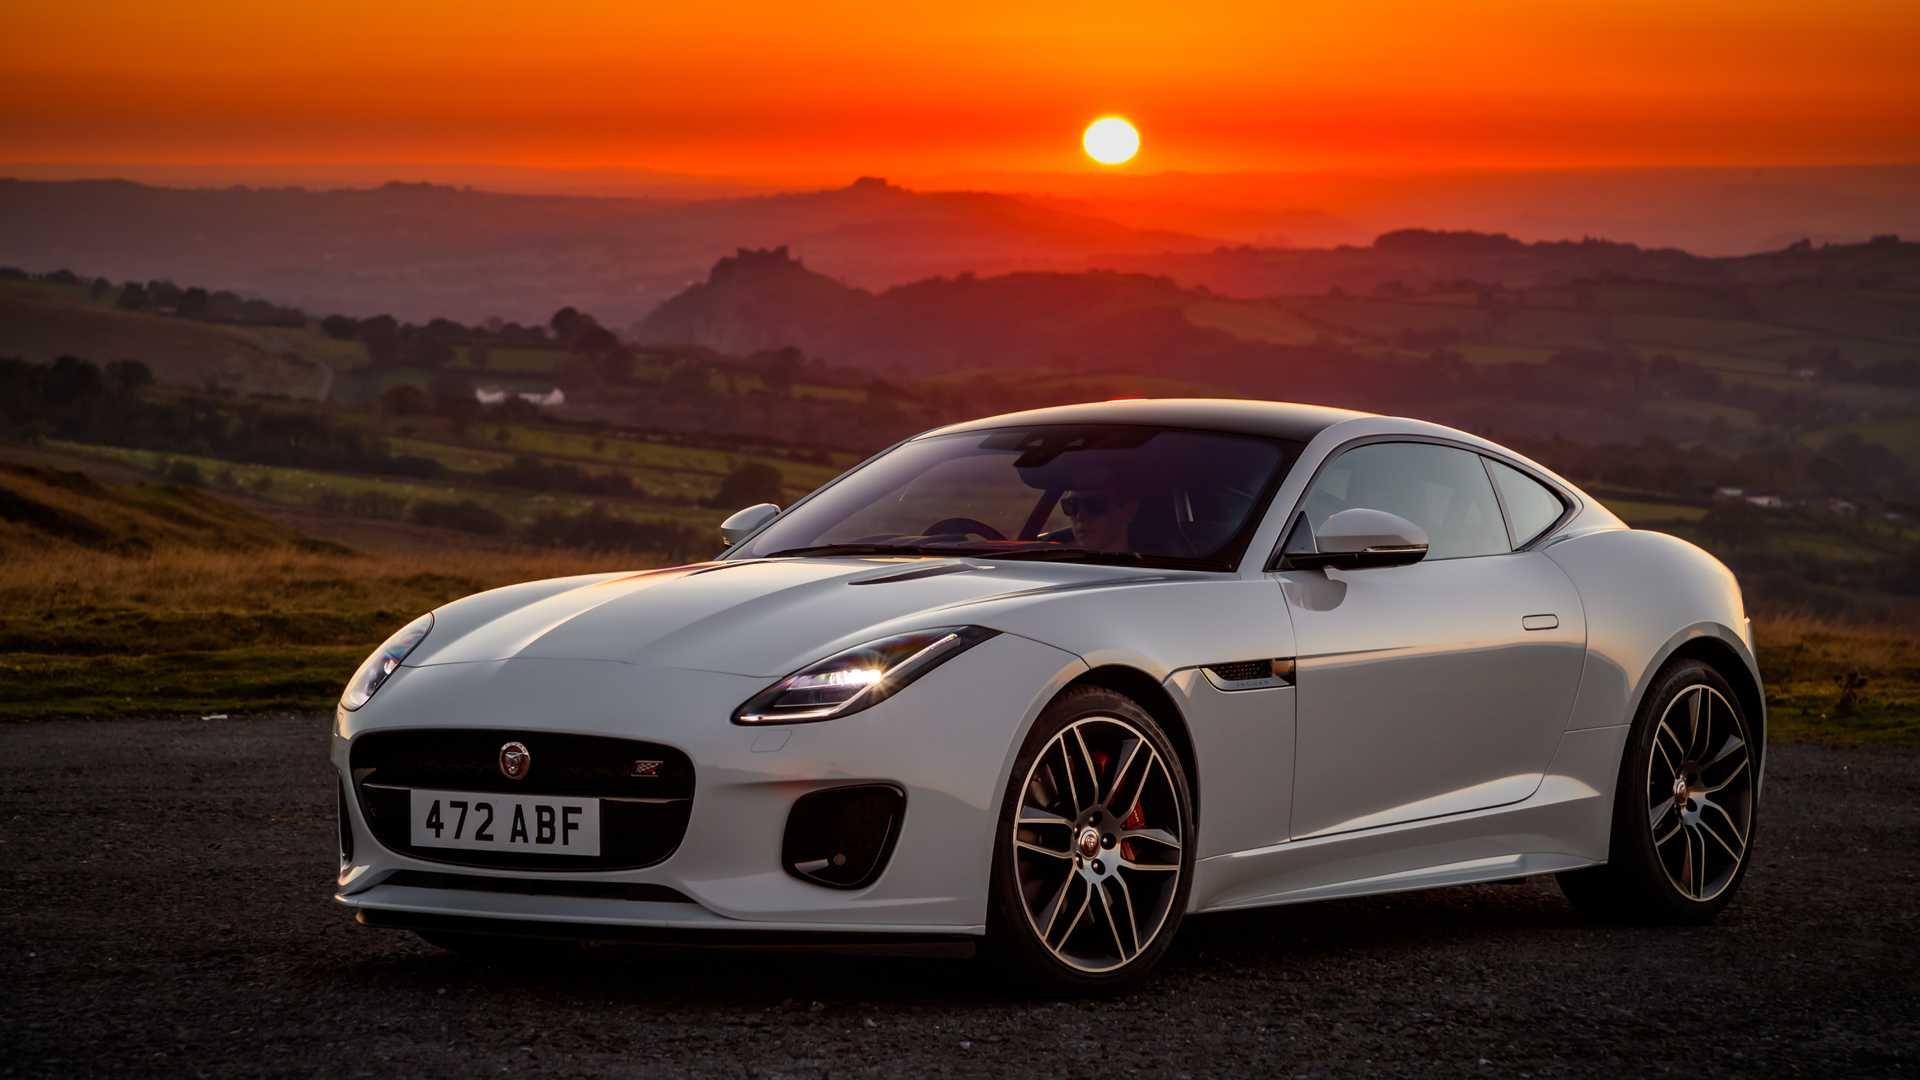 Red Checkered Flag Car Logo - Jaguar F Type Chequered Flag Edition Revealed For America